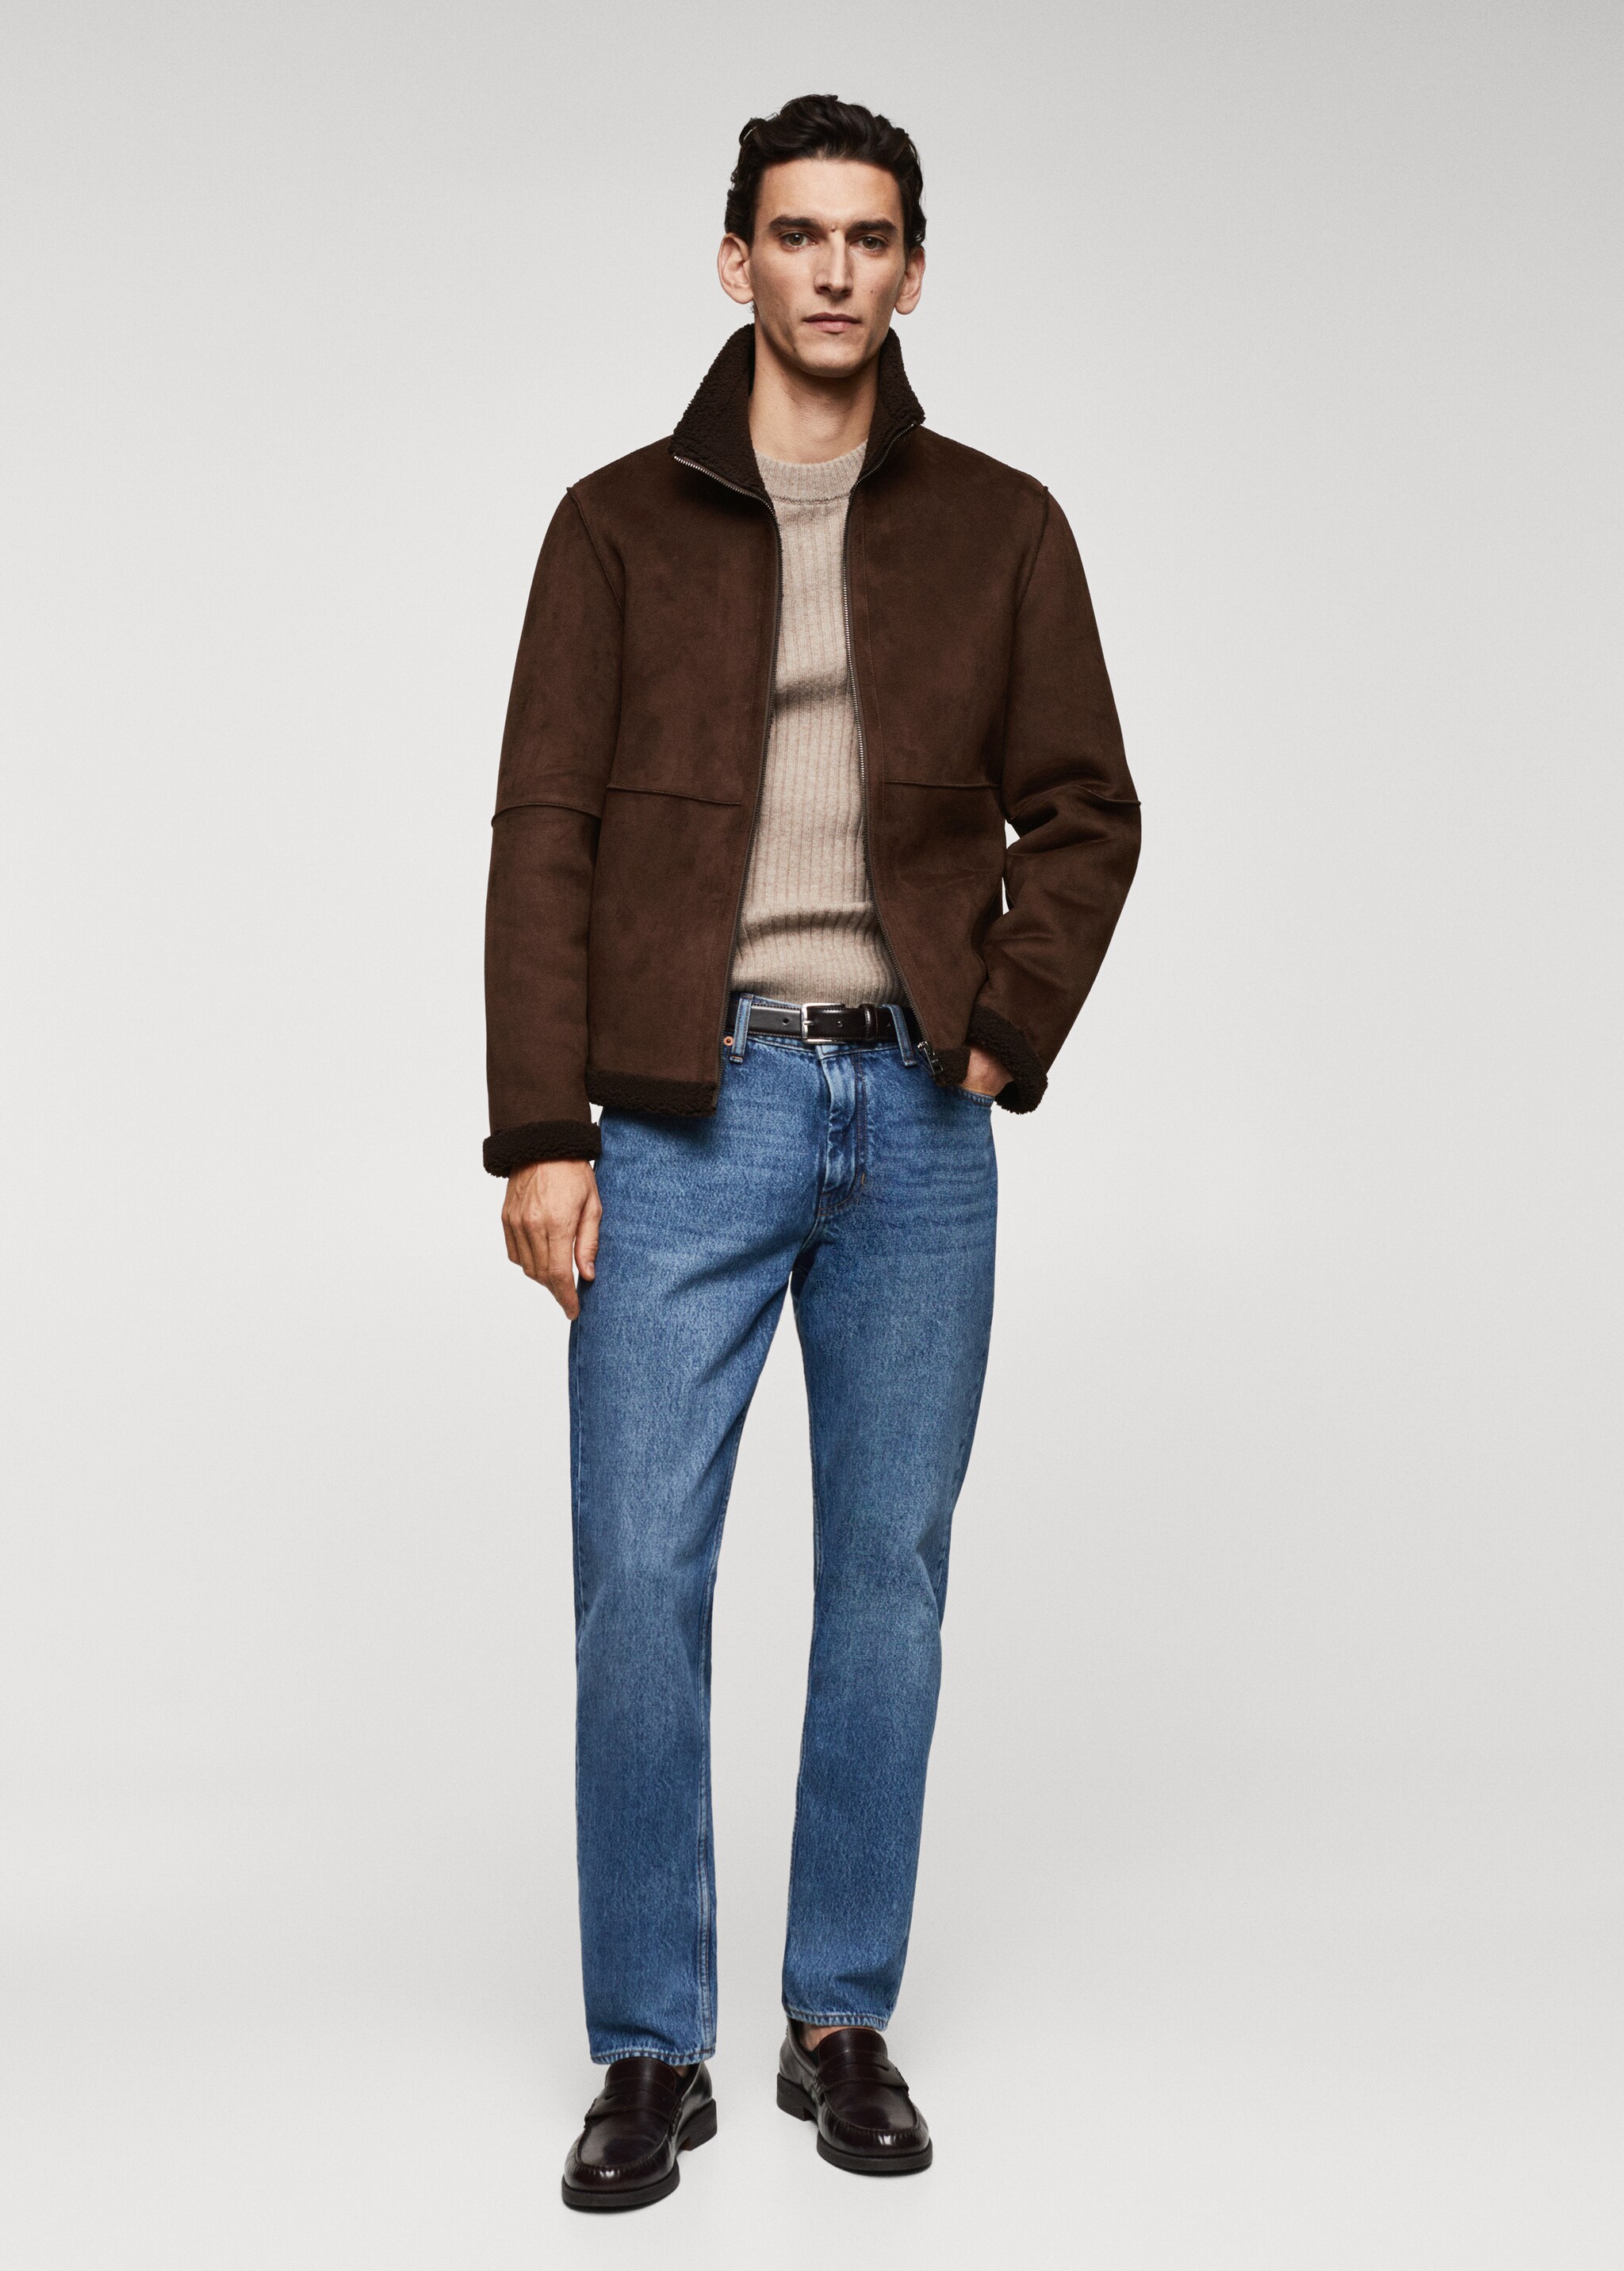 Shearling-lined leather-effect jacket - General plane